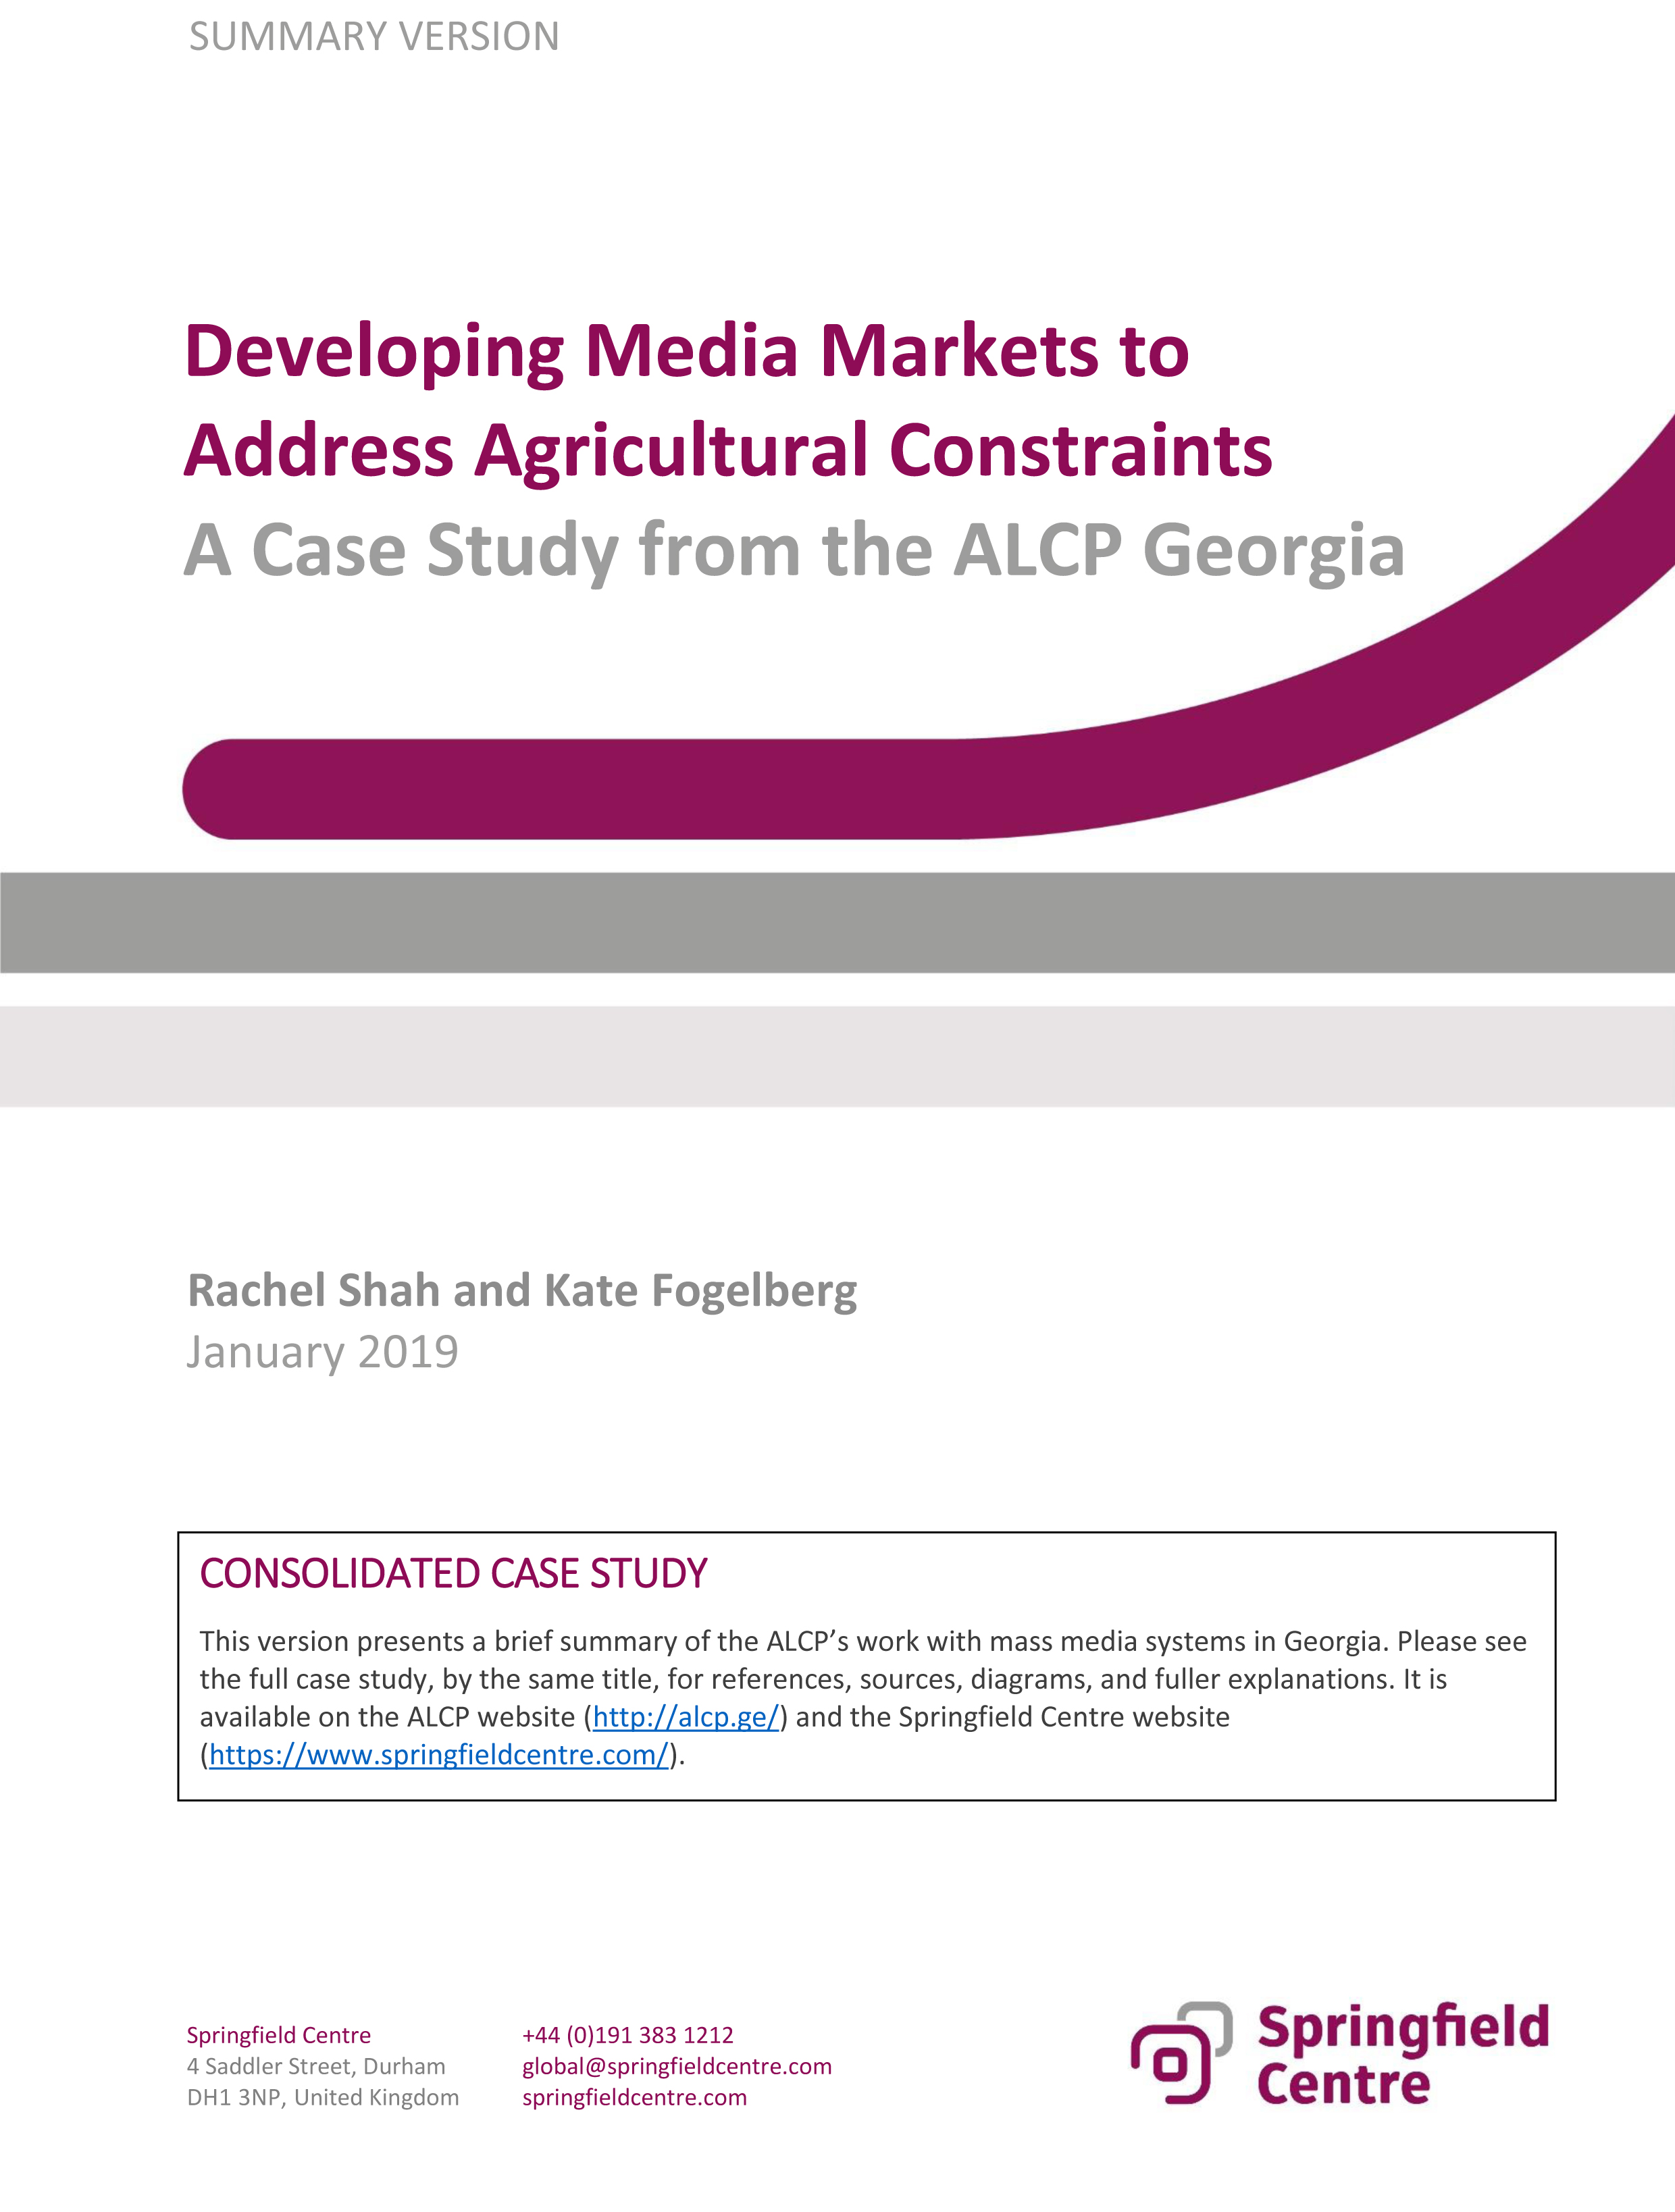 Developing Media Markets to Address Agricultural Constraints SUMMARY VERSION